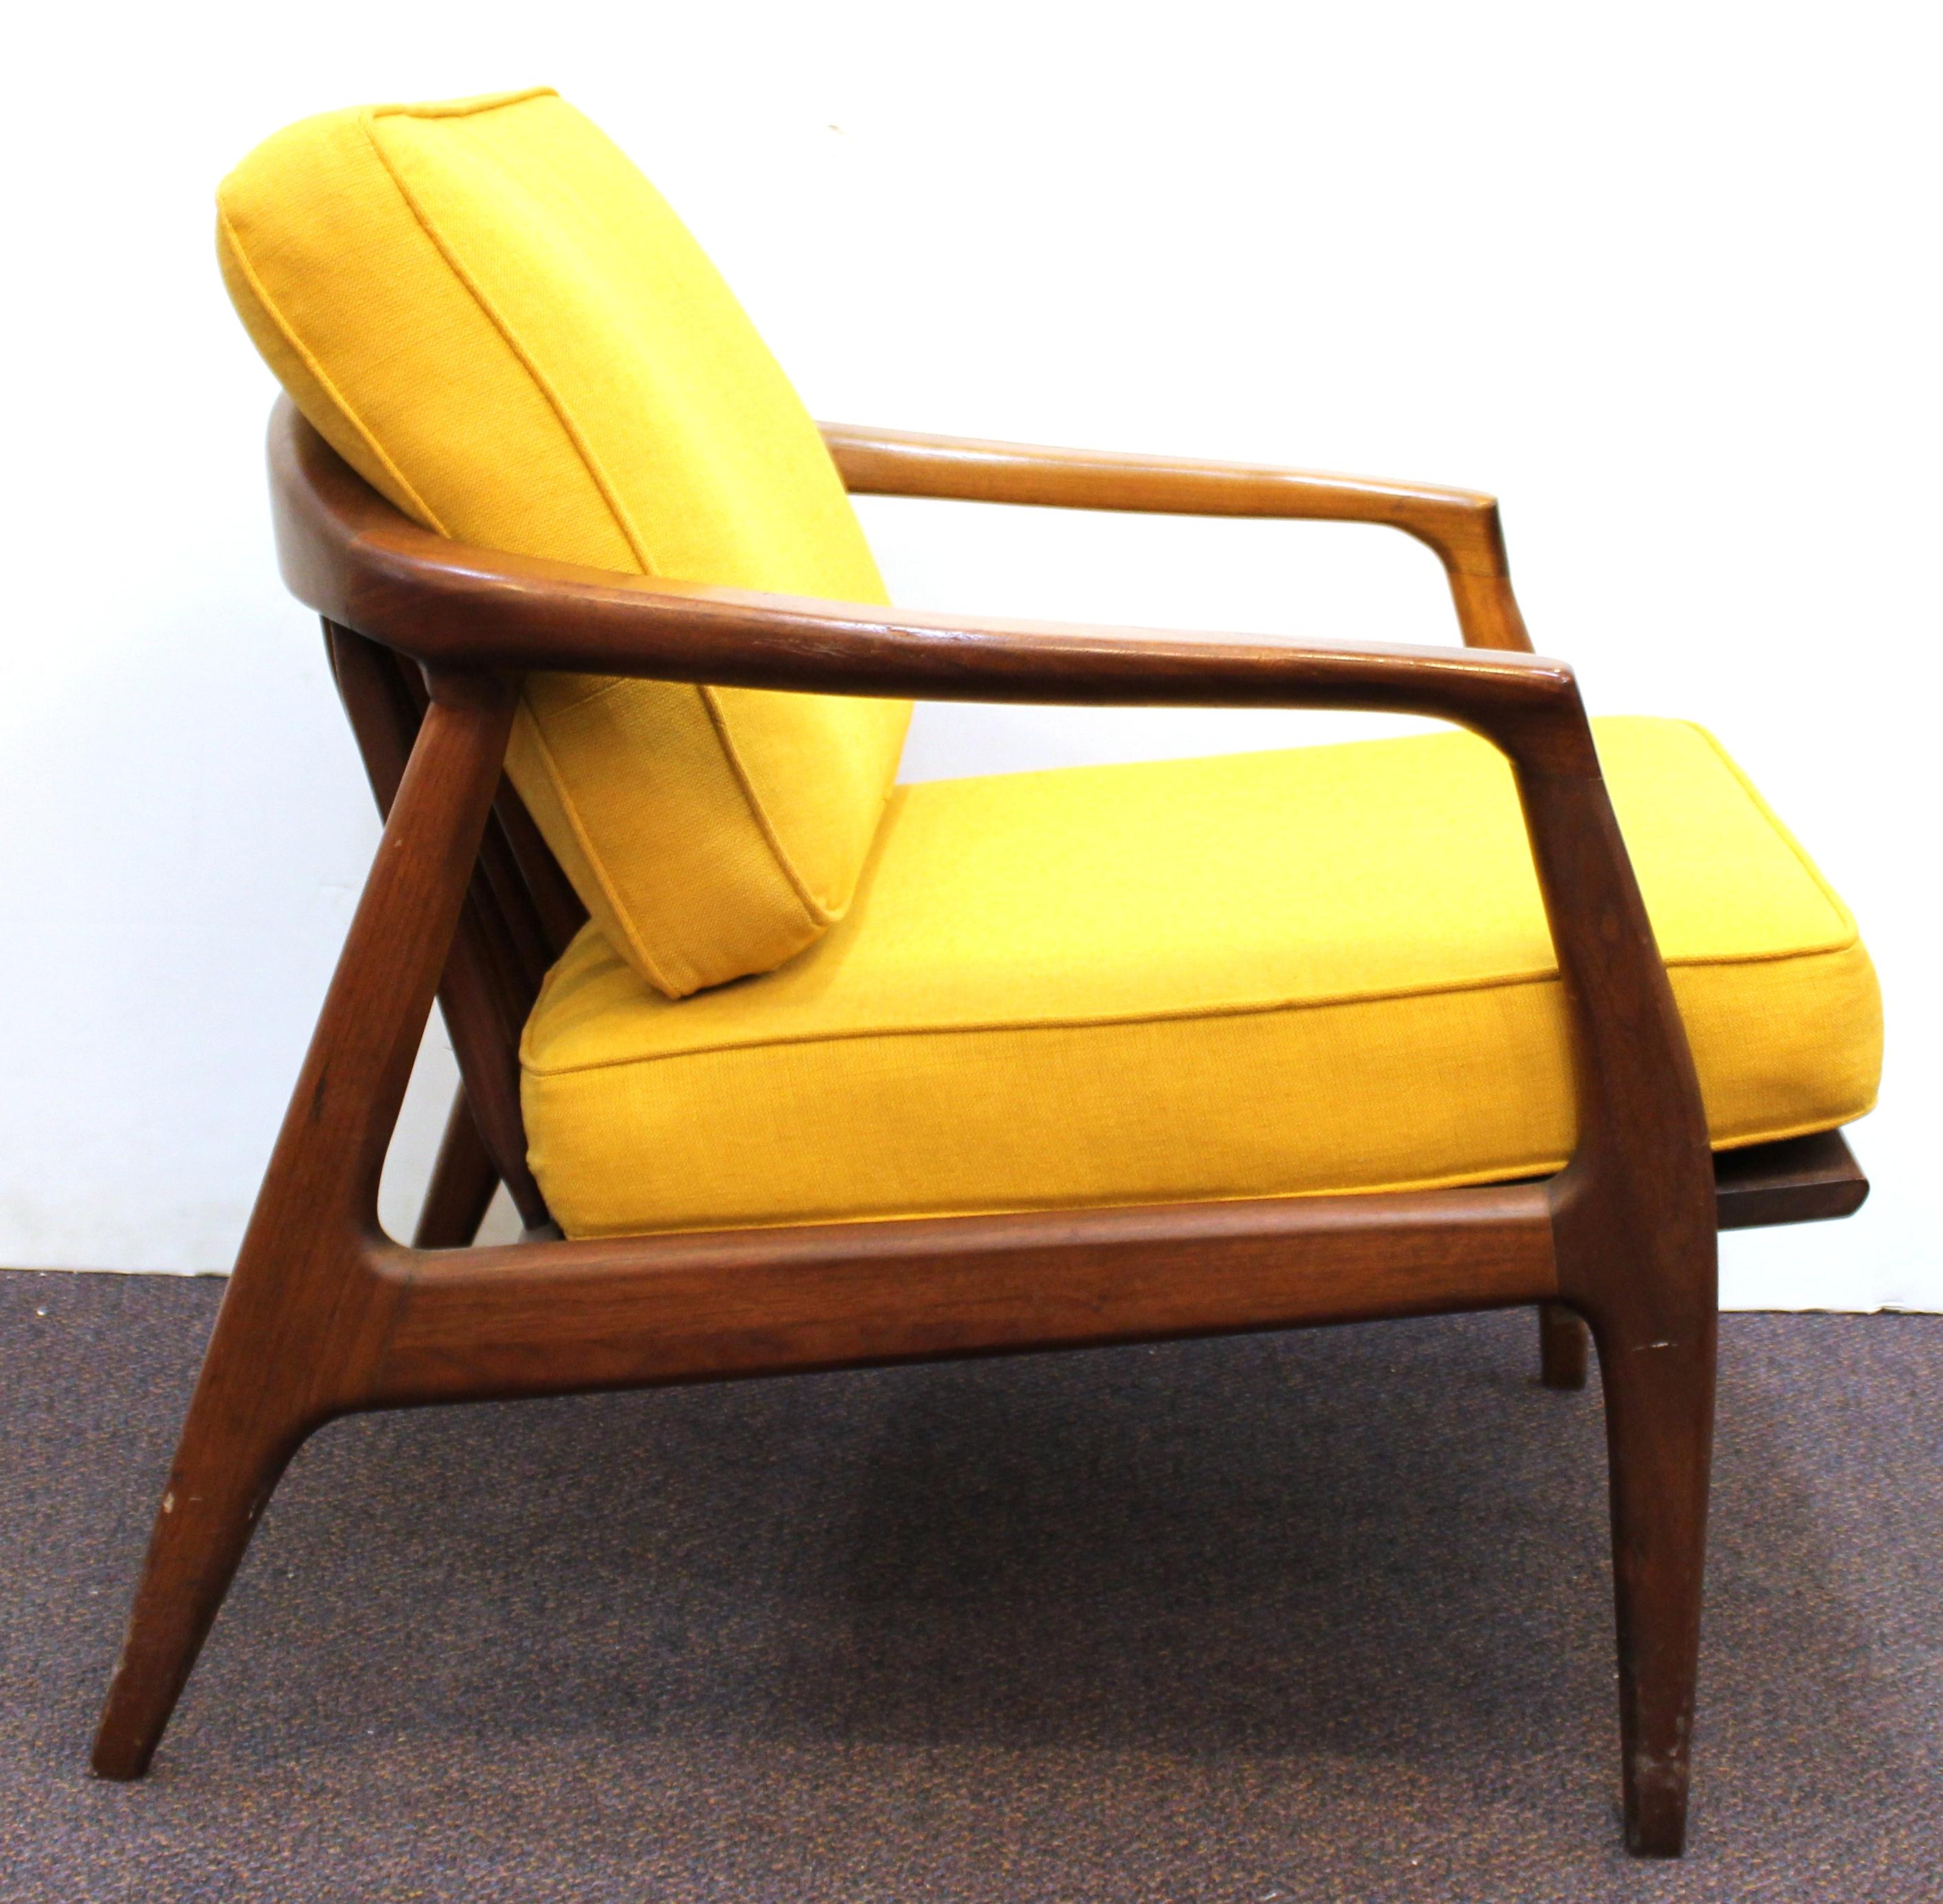 Upholstery Milo Baughman for Thayer Coggin Mid-Century Modern Lounge Chairs